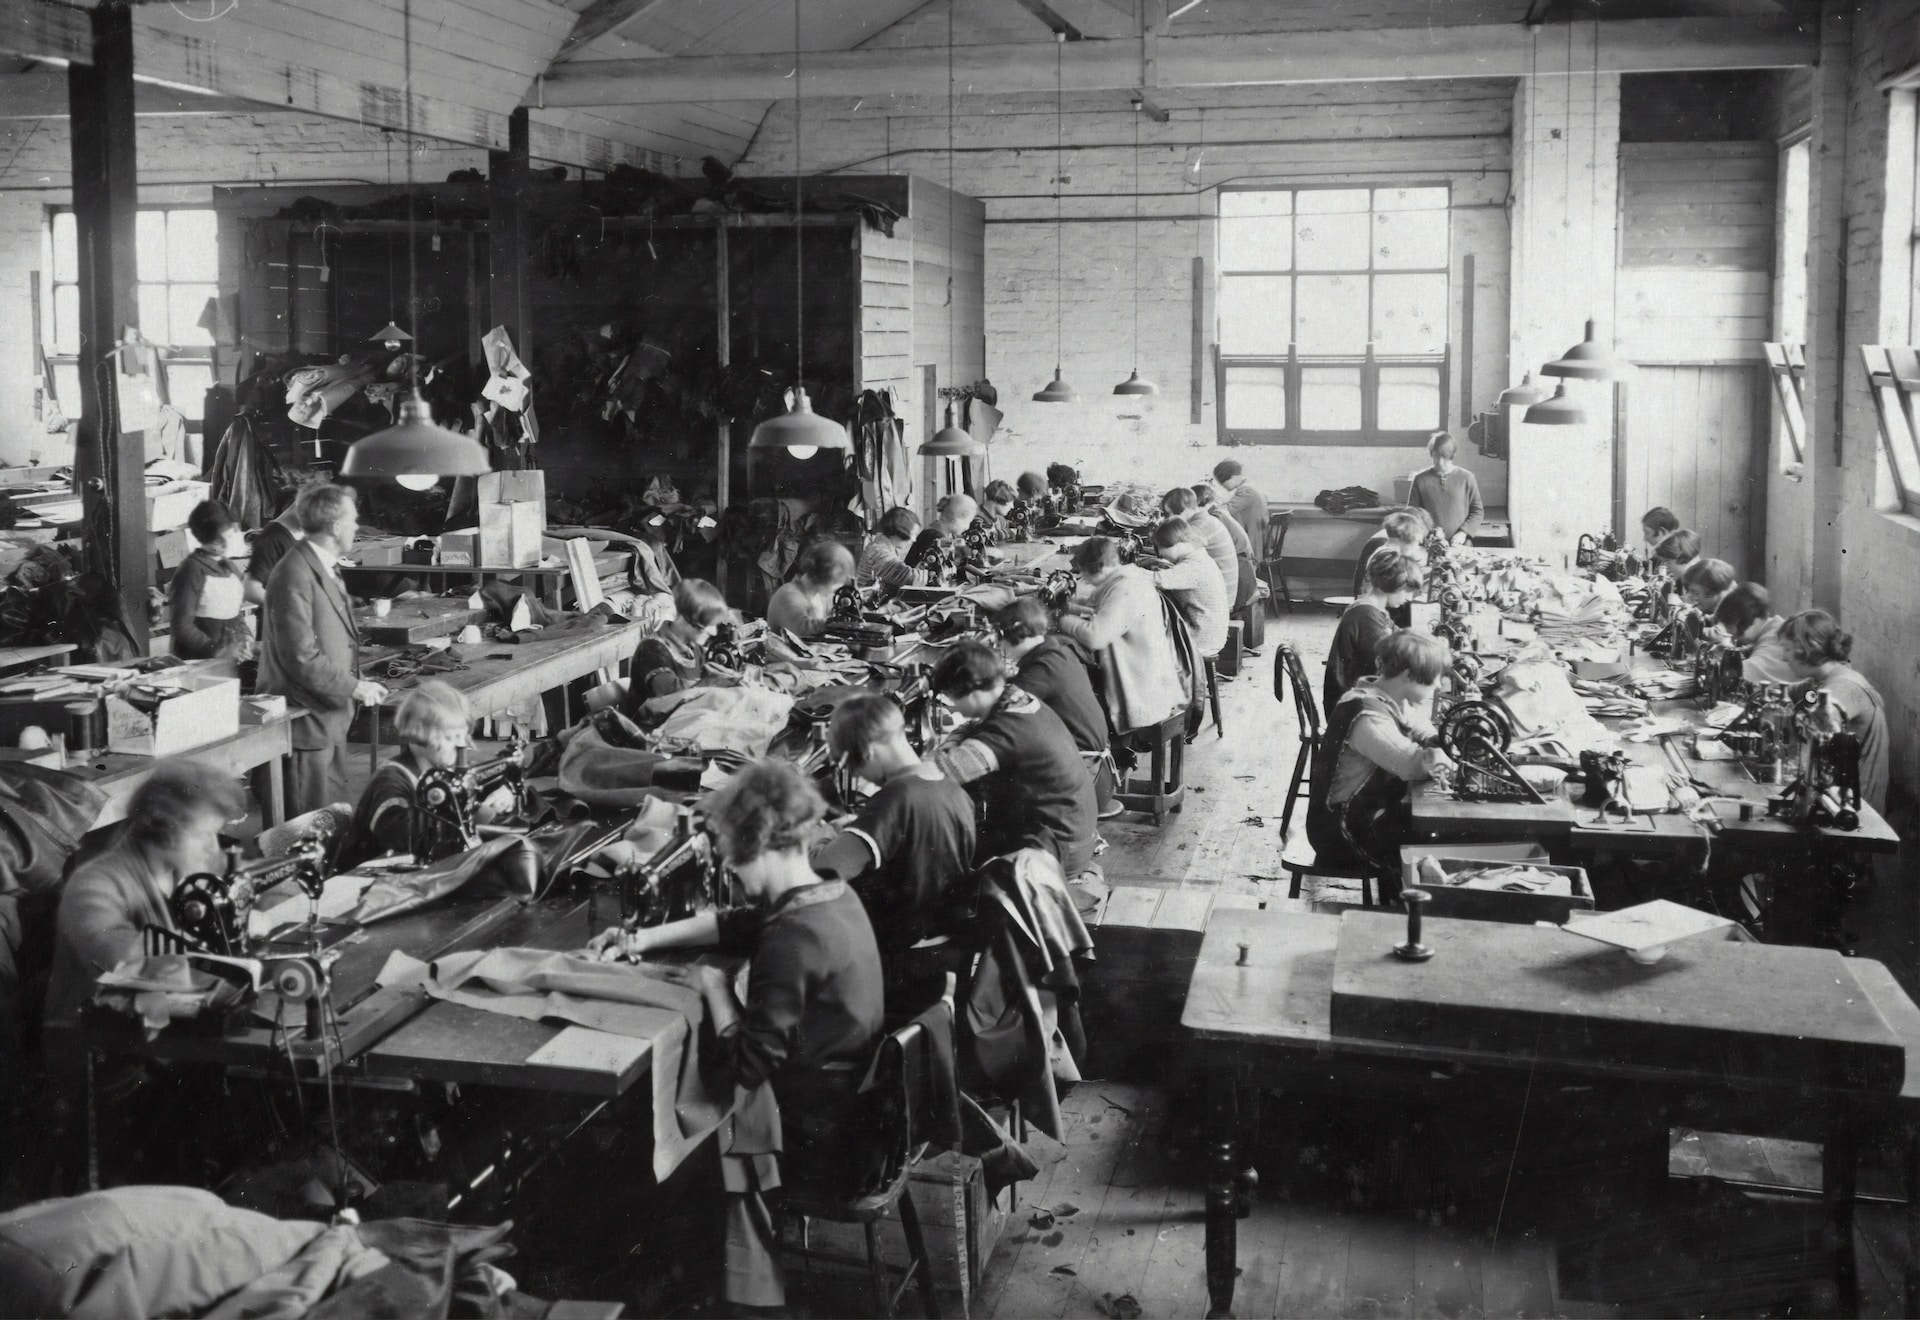 Industrial revolution workers in a factory.